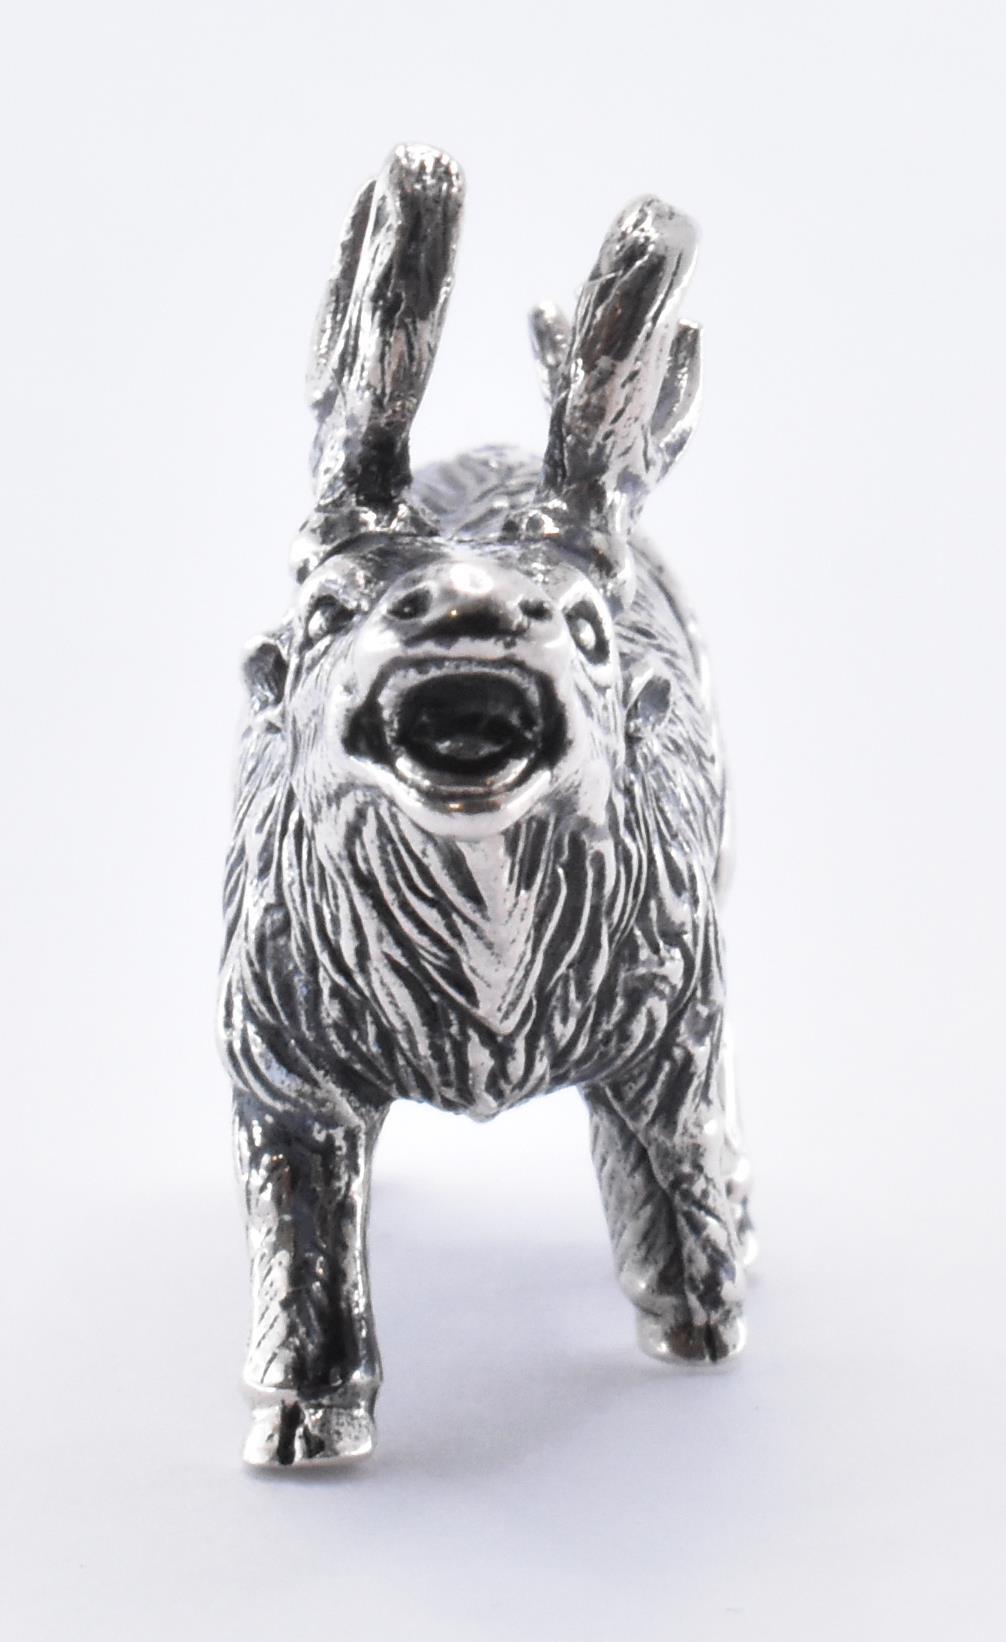 SILVER STAG FIGURINE - Image 3 of 5